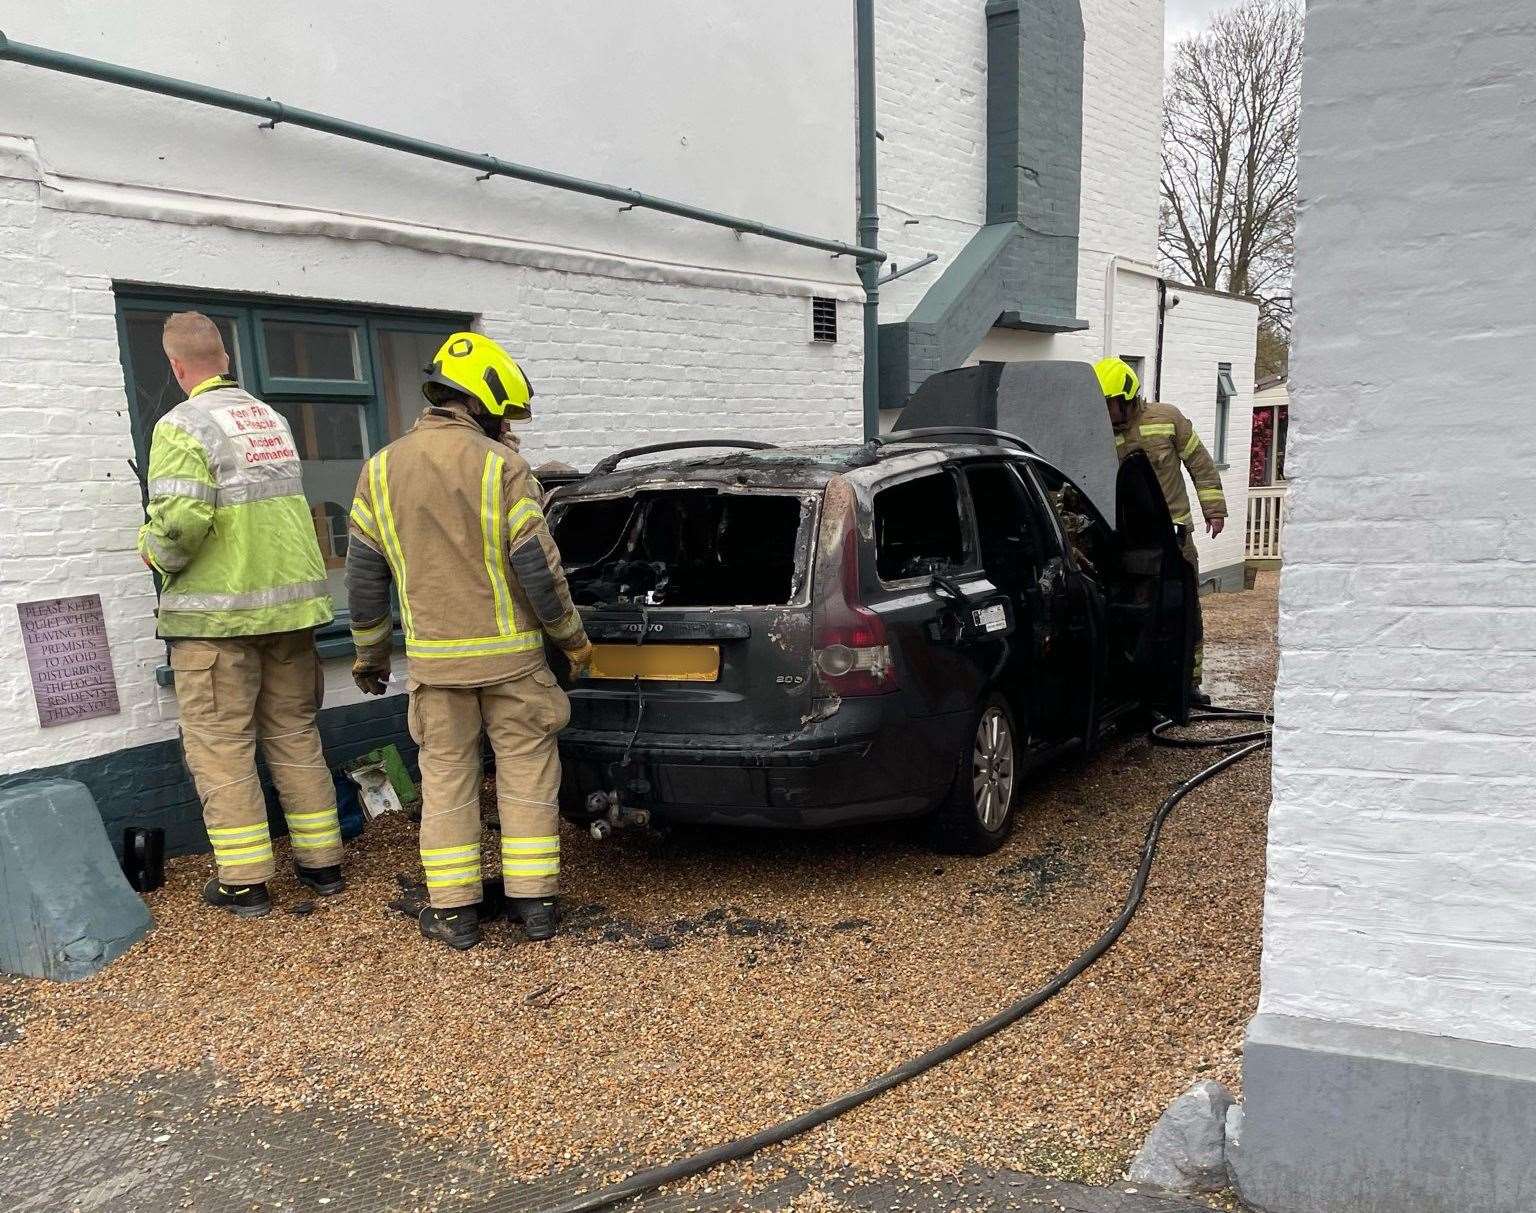 A Volvo was heavily damaged after the blaze